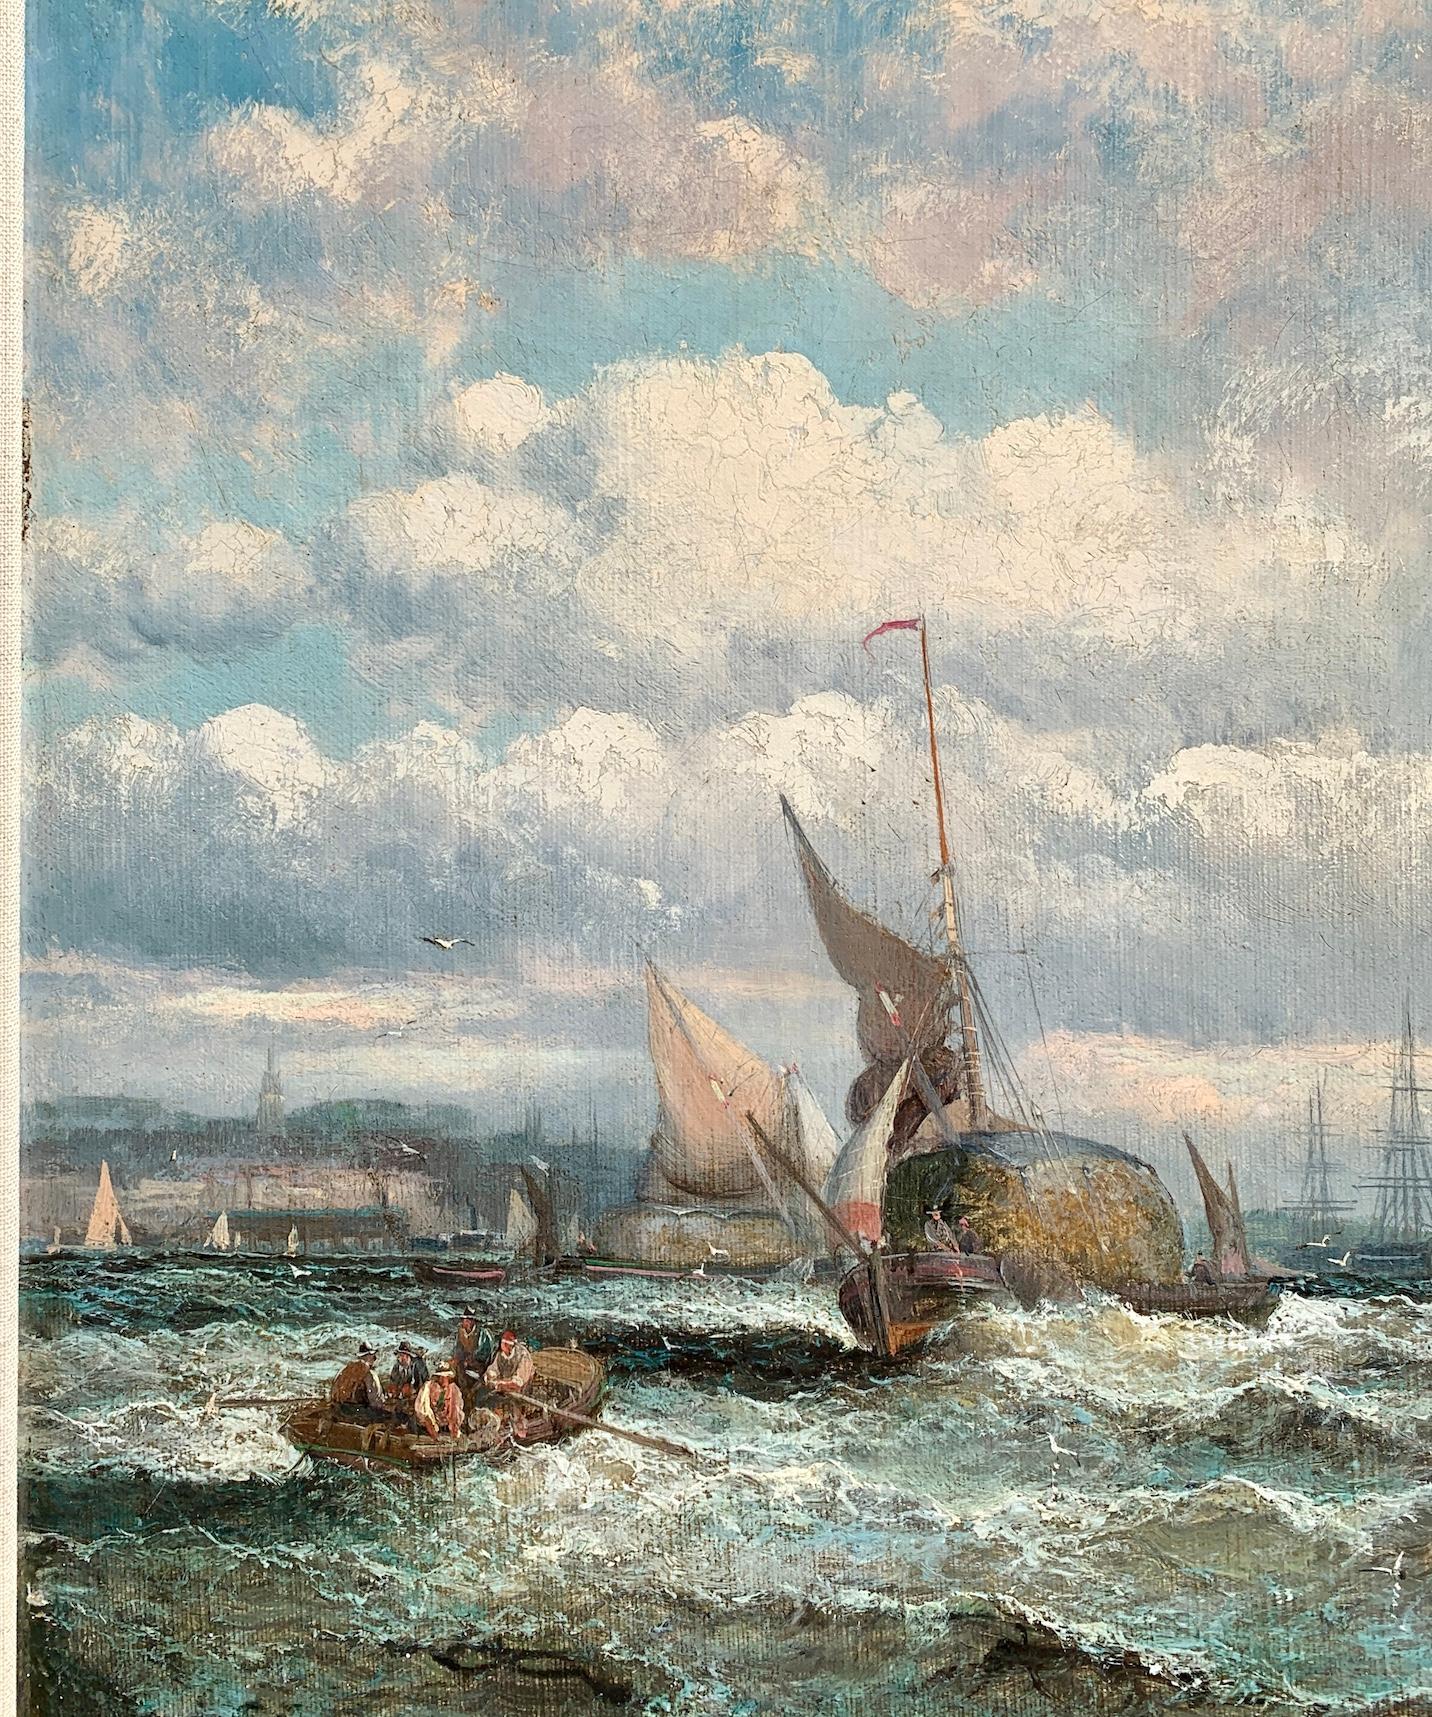 19th century English marine seascape, with fishing boats in the North Sea - Painting by William Thornley